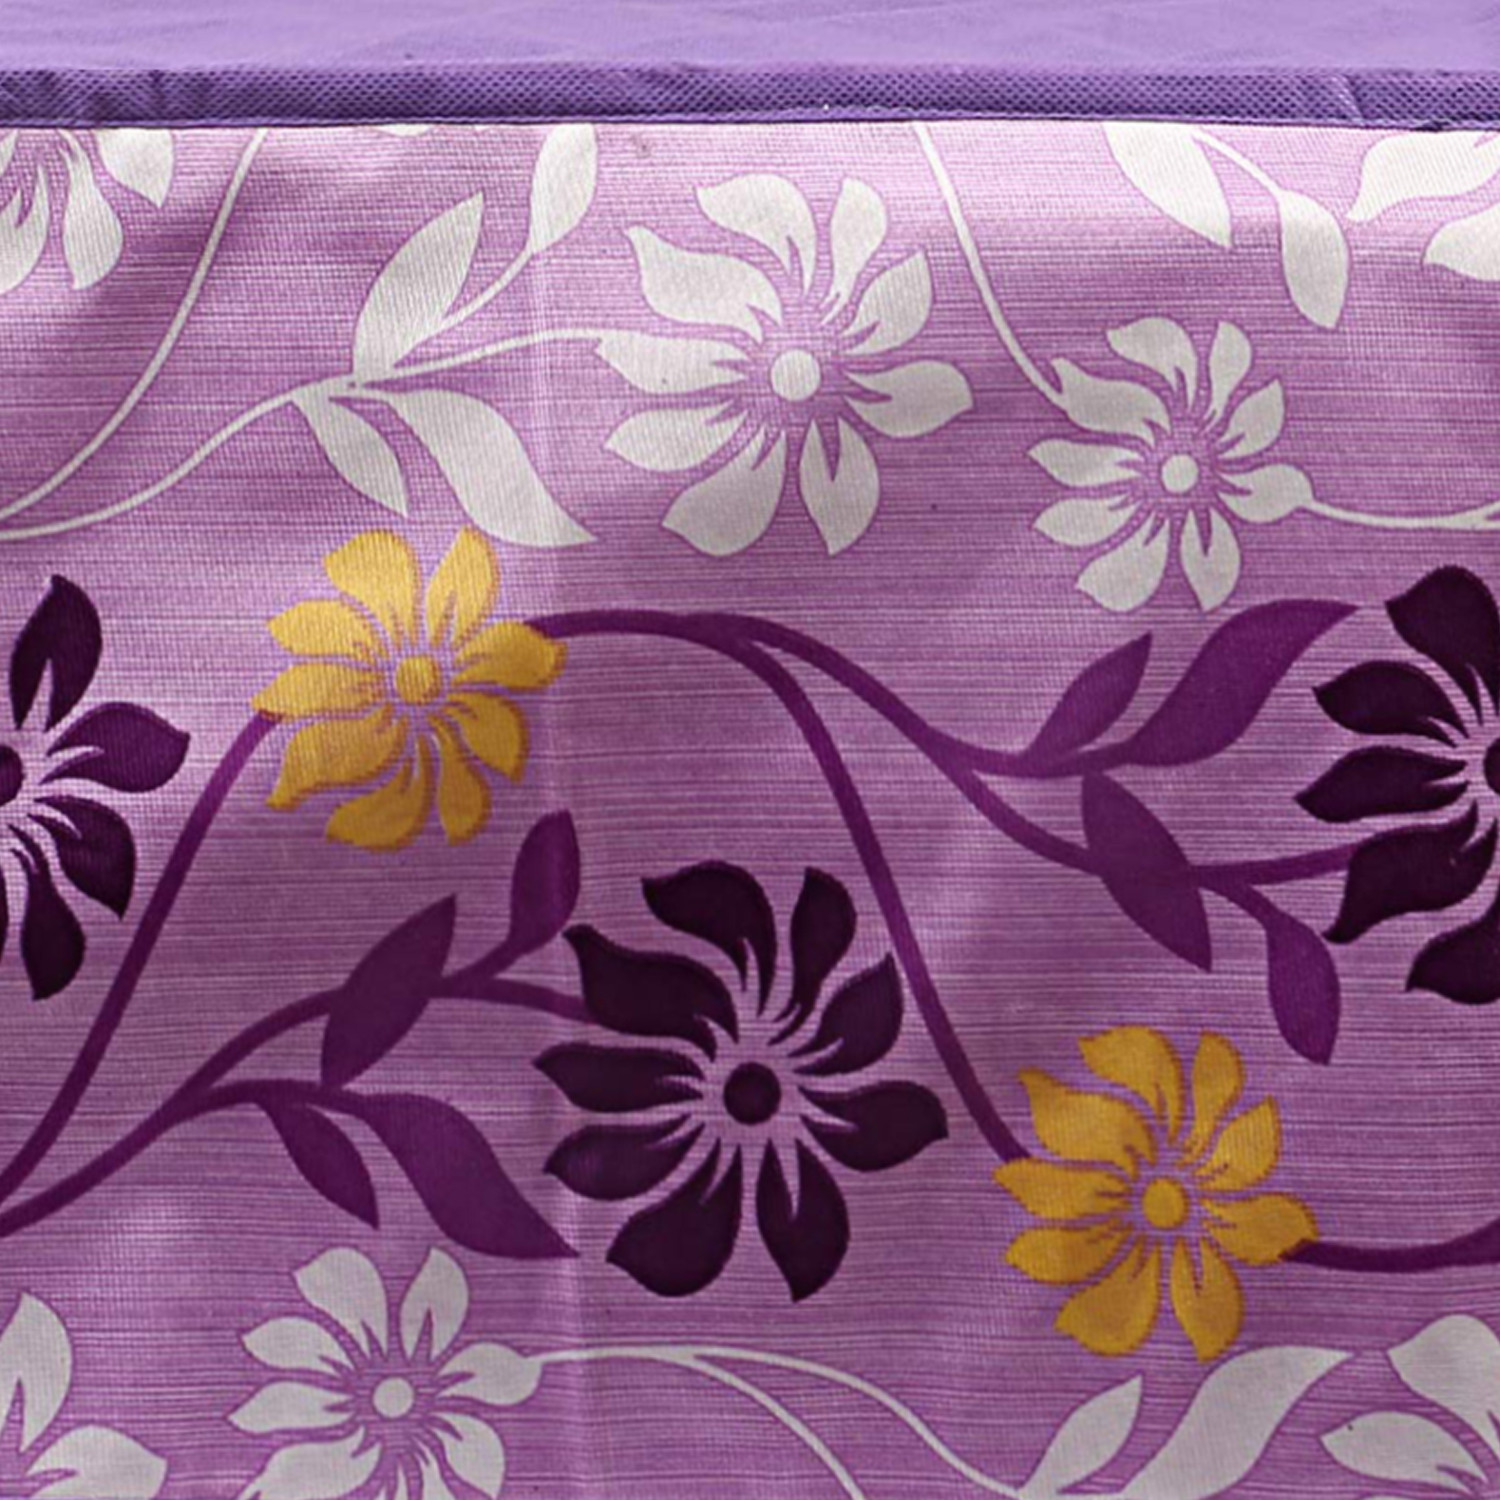 Kuber Industries Multiuses Polyester Floral Print Microwave Oven Cover For Home & Kitchen 20 Ltr. (Purple)